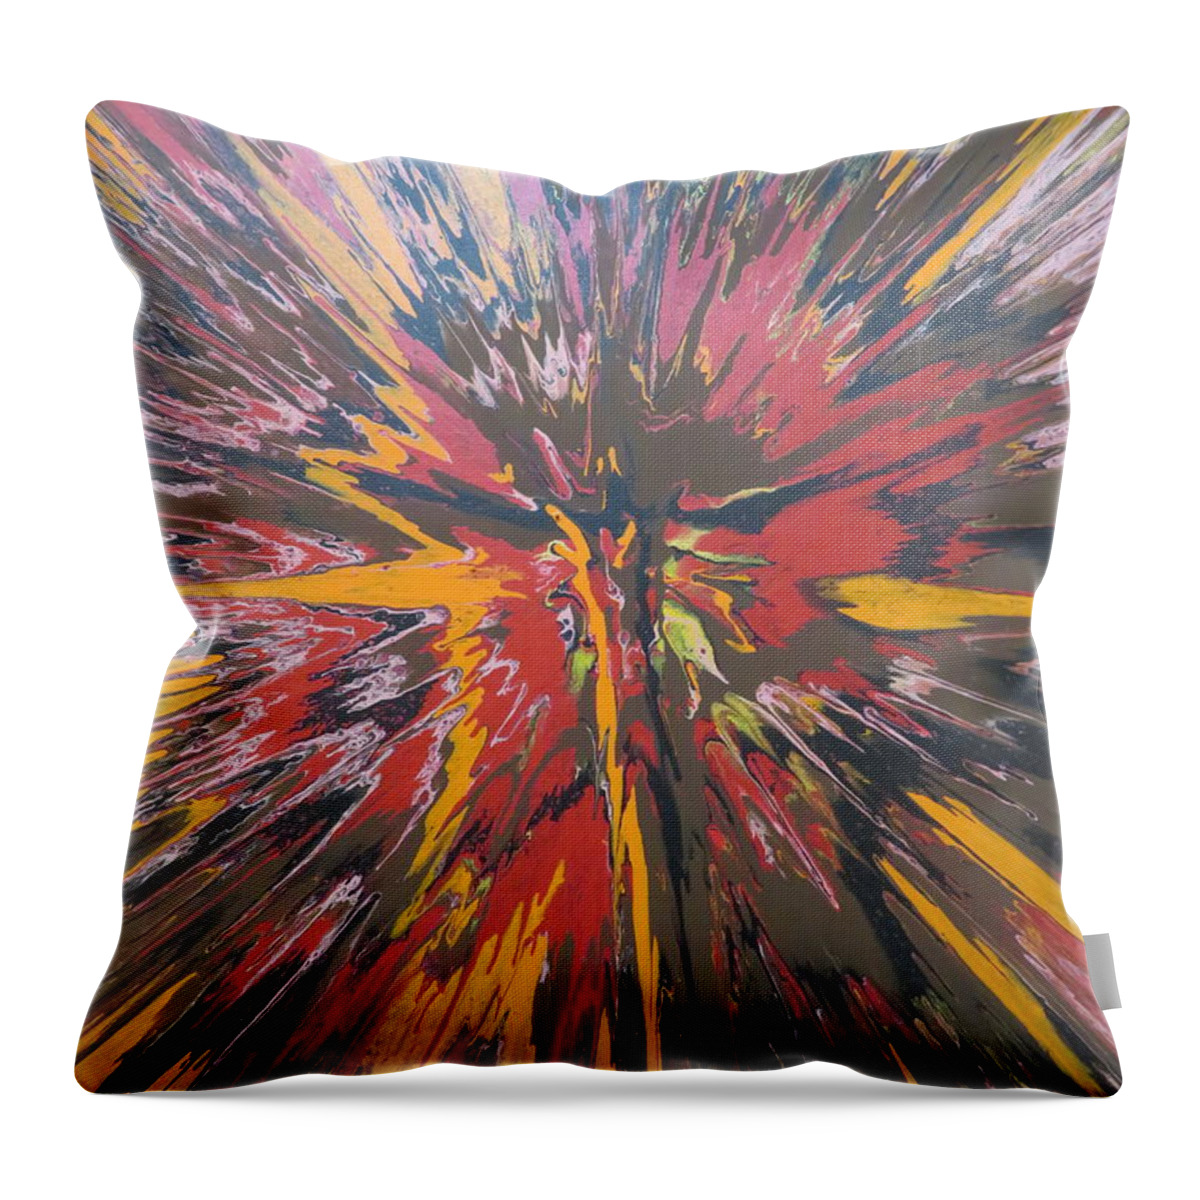 Acrylic Throw Pillow featuring the painting Brown Explosion by Sonya Walker